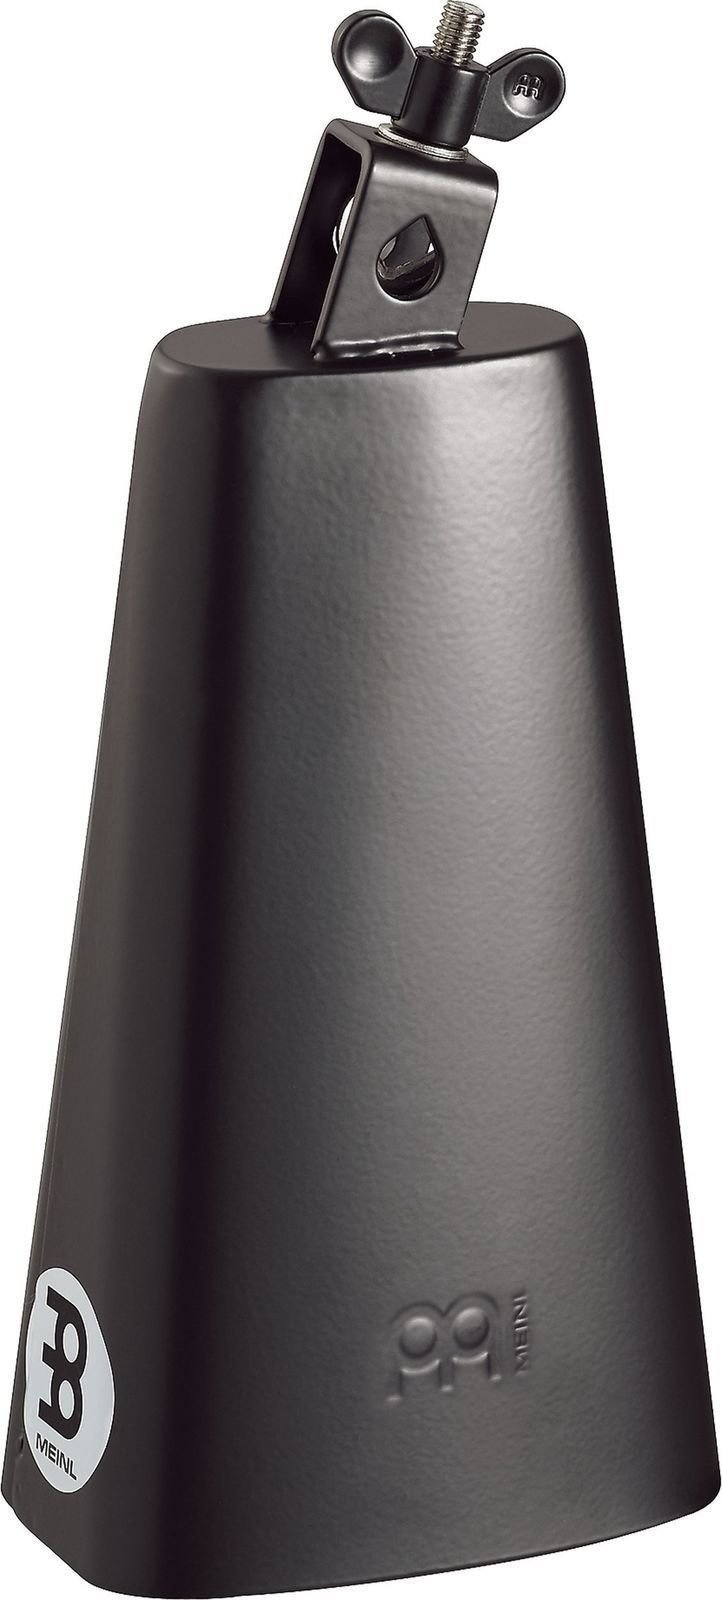 Percussion Cowbell Meinl SL850-BK Percussion Cowbell